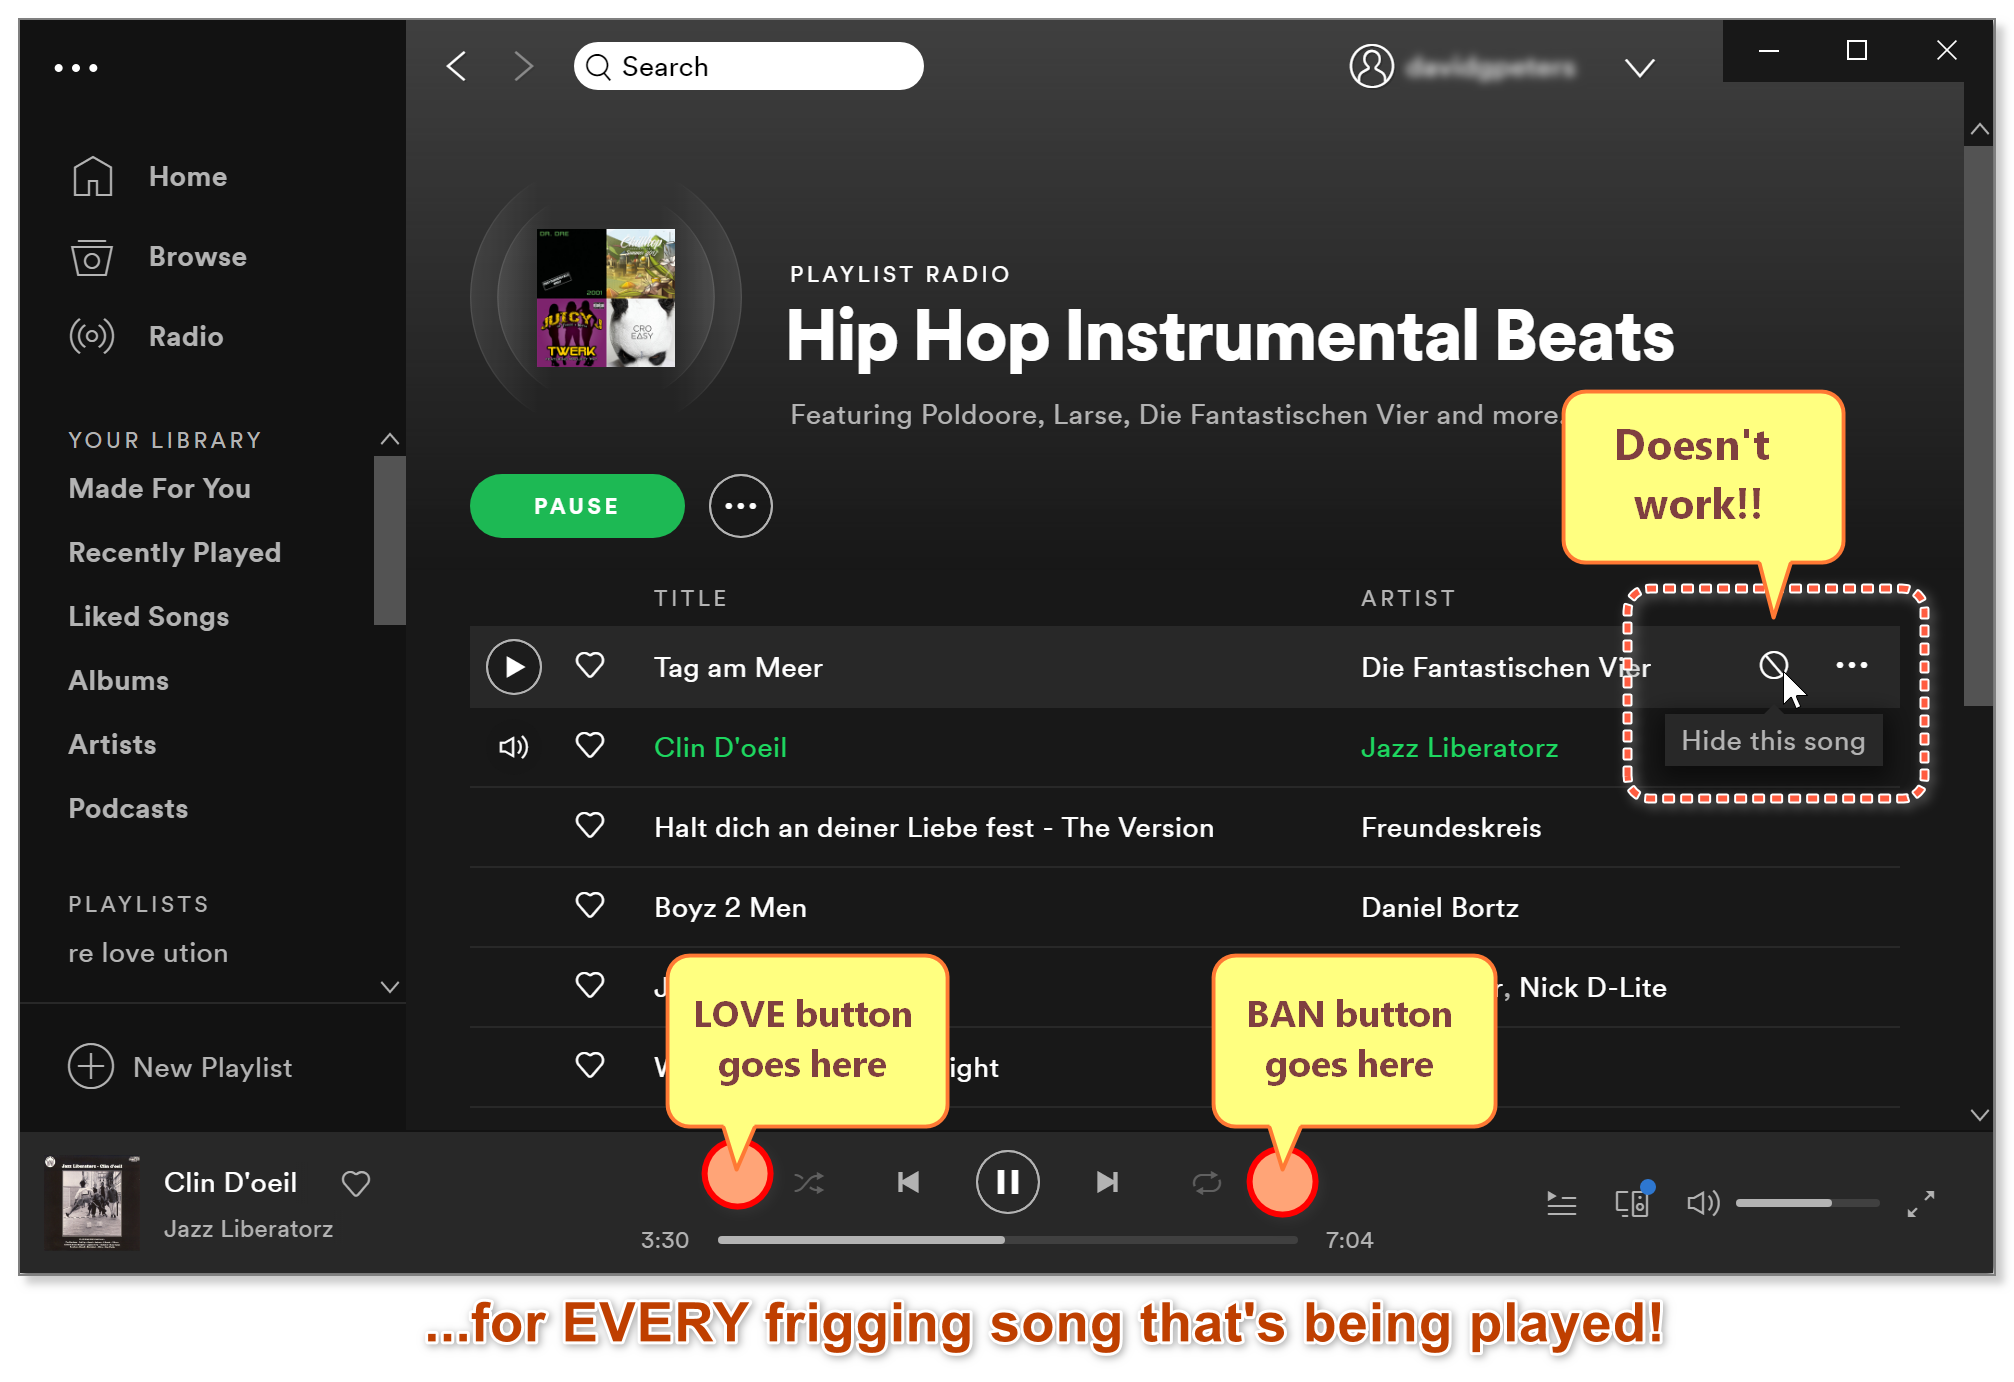 Dislike button missing from Spotify - The Spotify Community